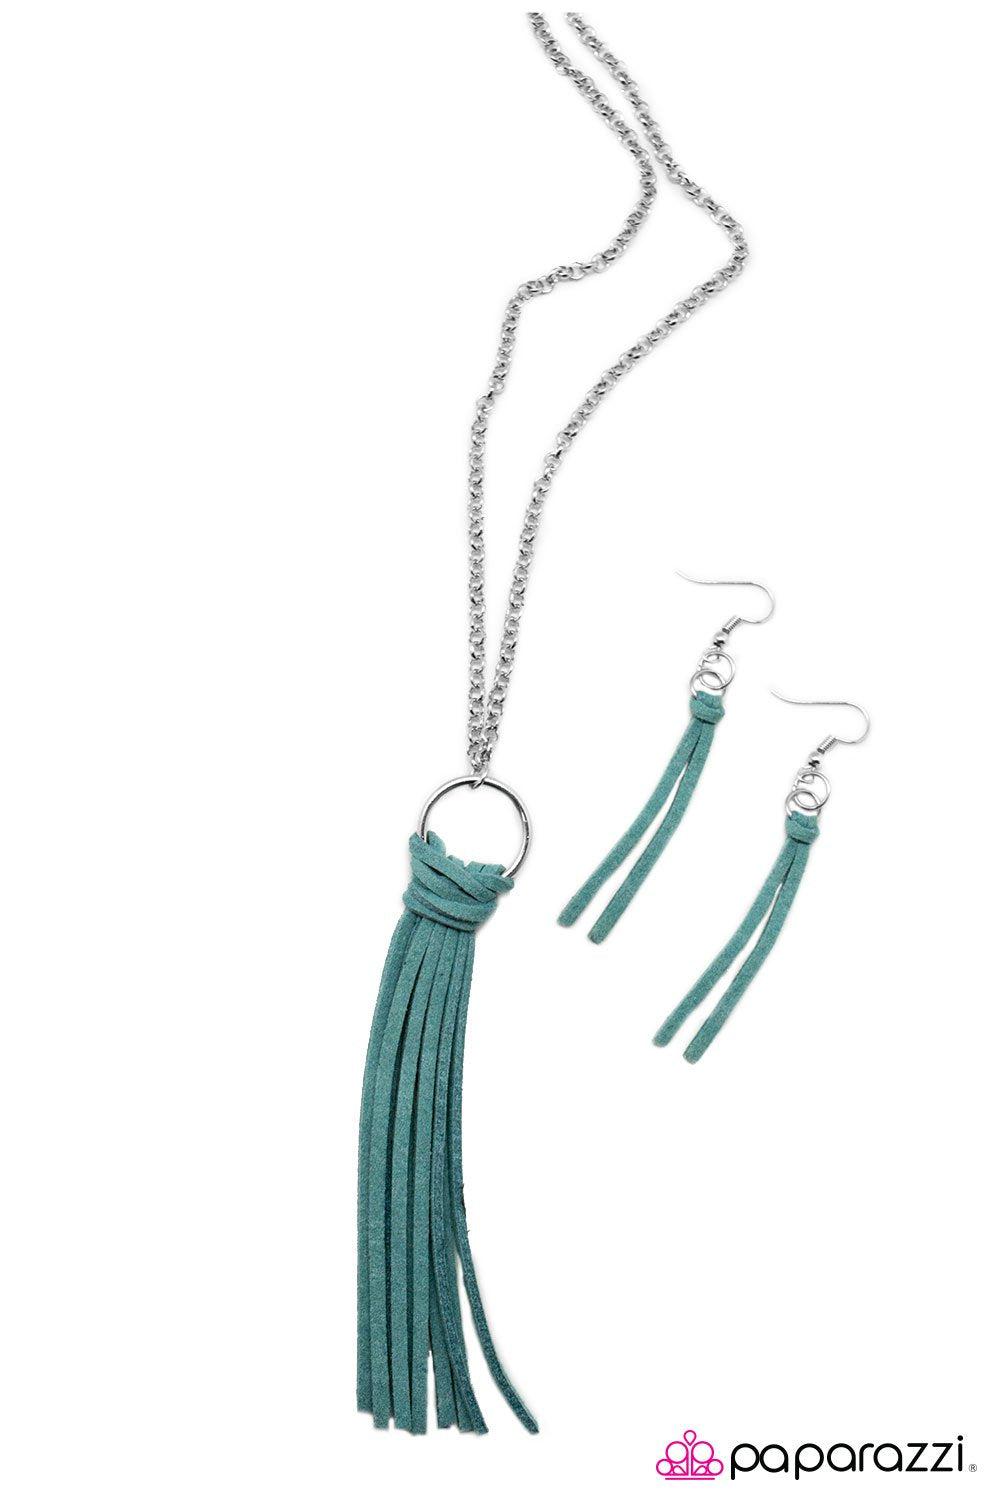 FRINGE With Benefits Blue Suede Tassel Necklace - Paparazzi Accessories-CarasShop.com - $5 Jewelry by Cara Jewels